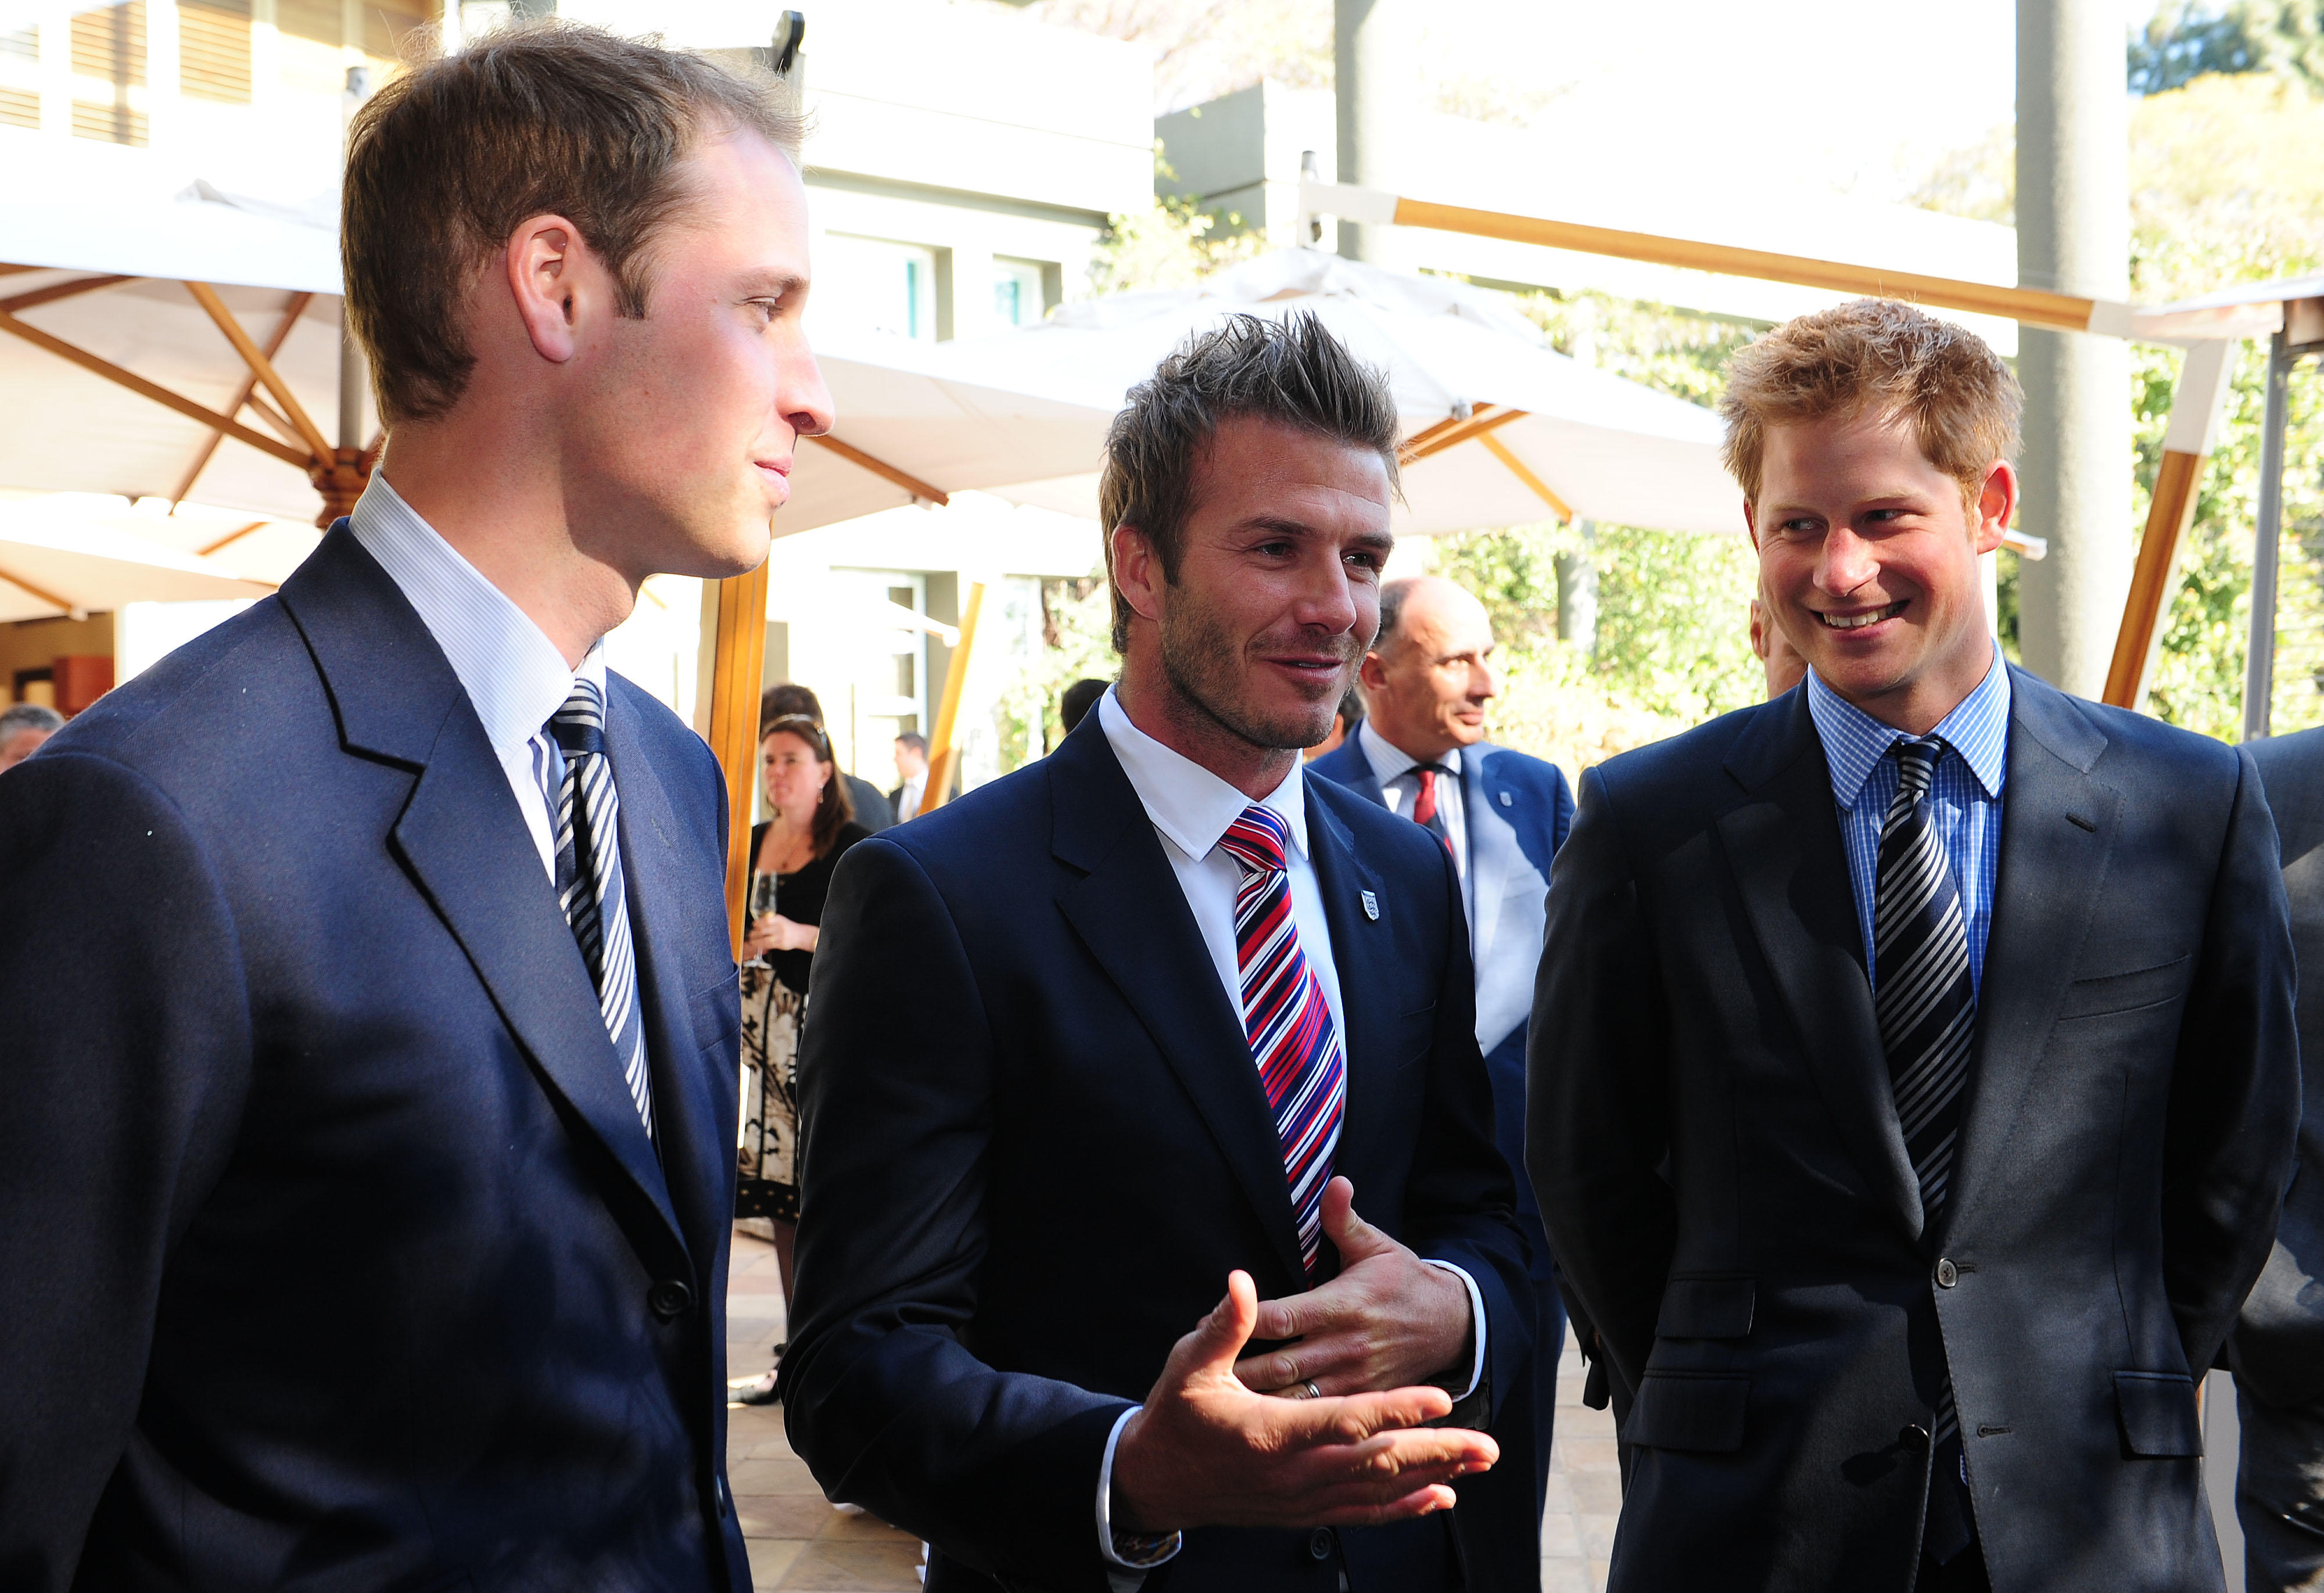 As a man who loved the Royals, David initially got on well with Harry